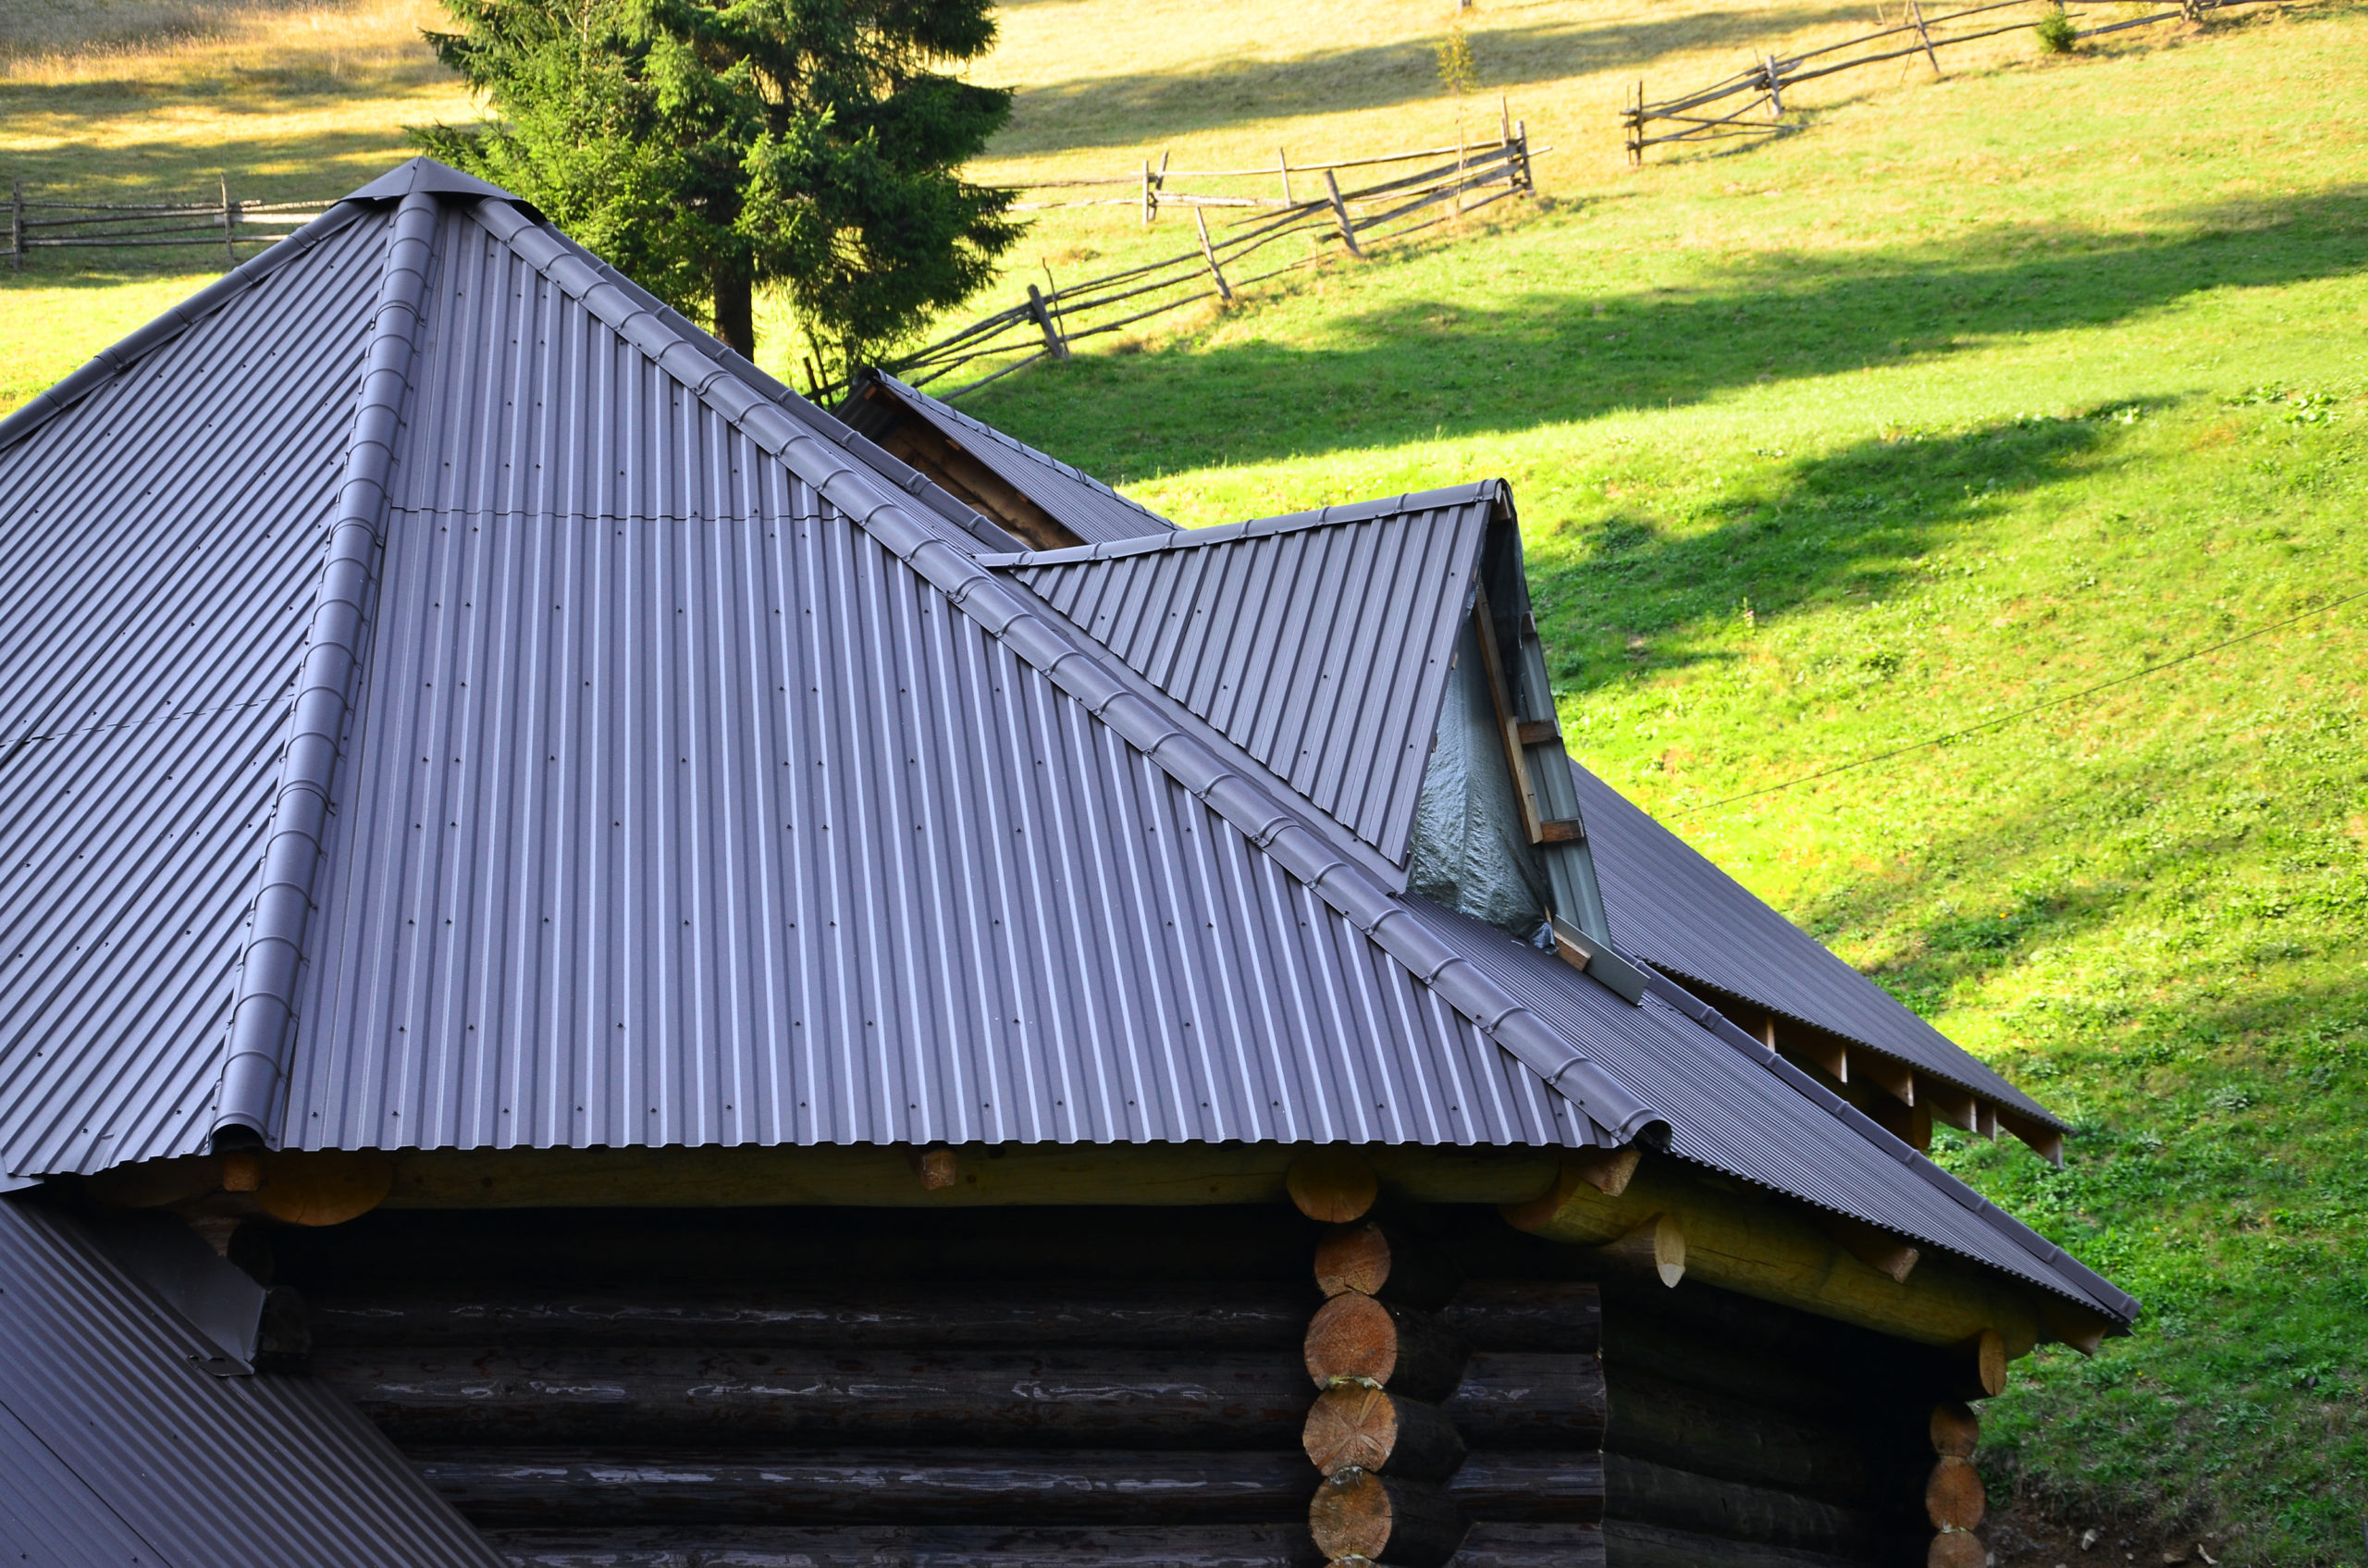 The roof is made of gray embossed metal sheets. Wooden house in the summer field